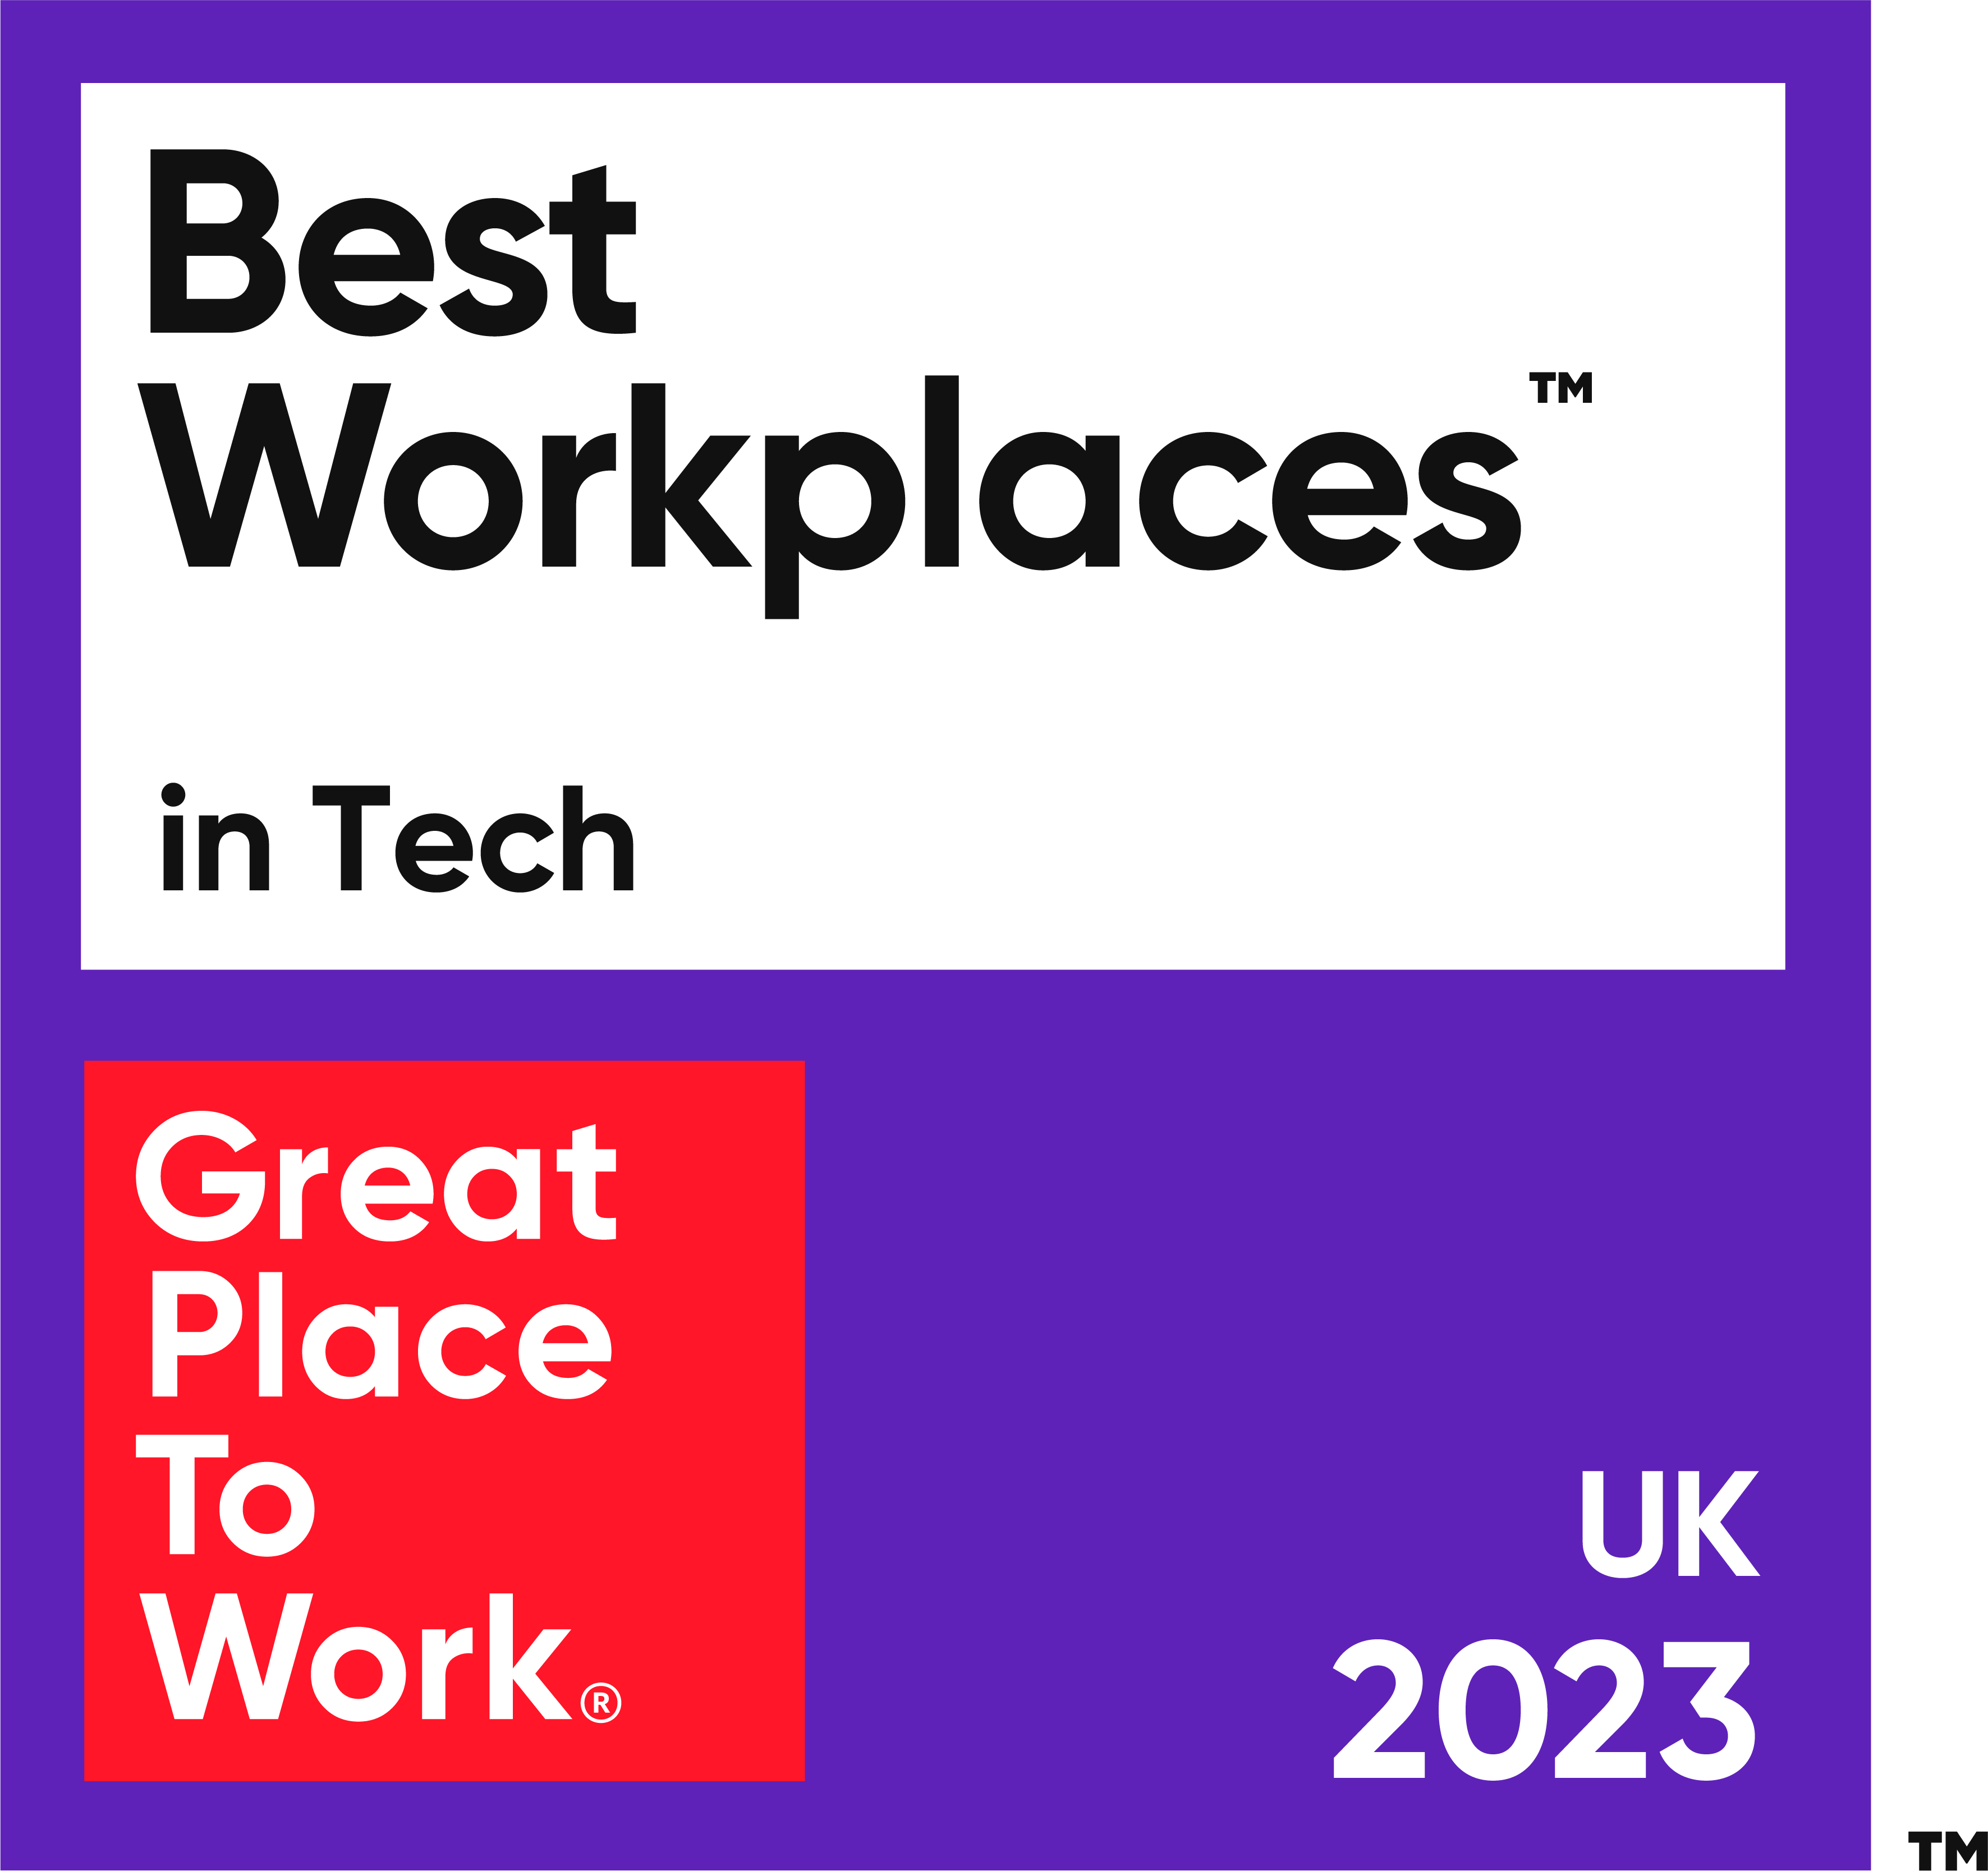 Airwalk Reply is recognised as one of the UK’s Best Workplaces in Tech™